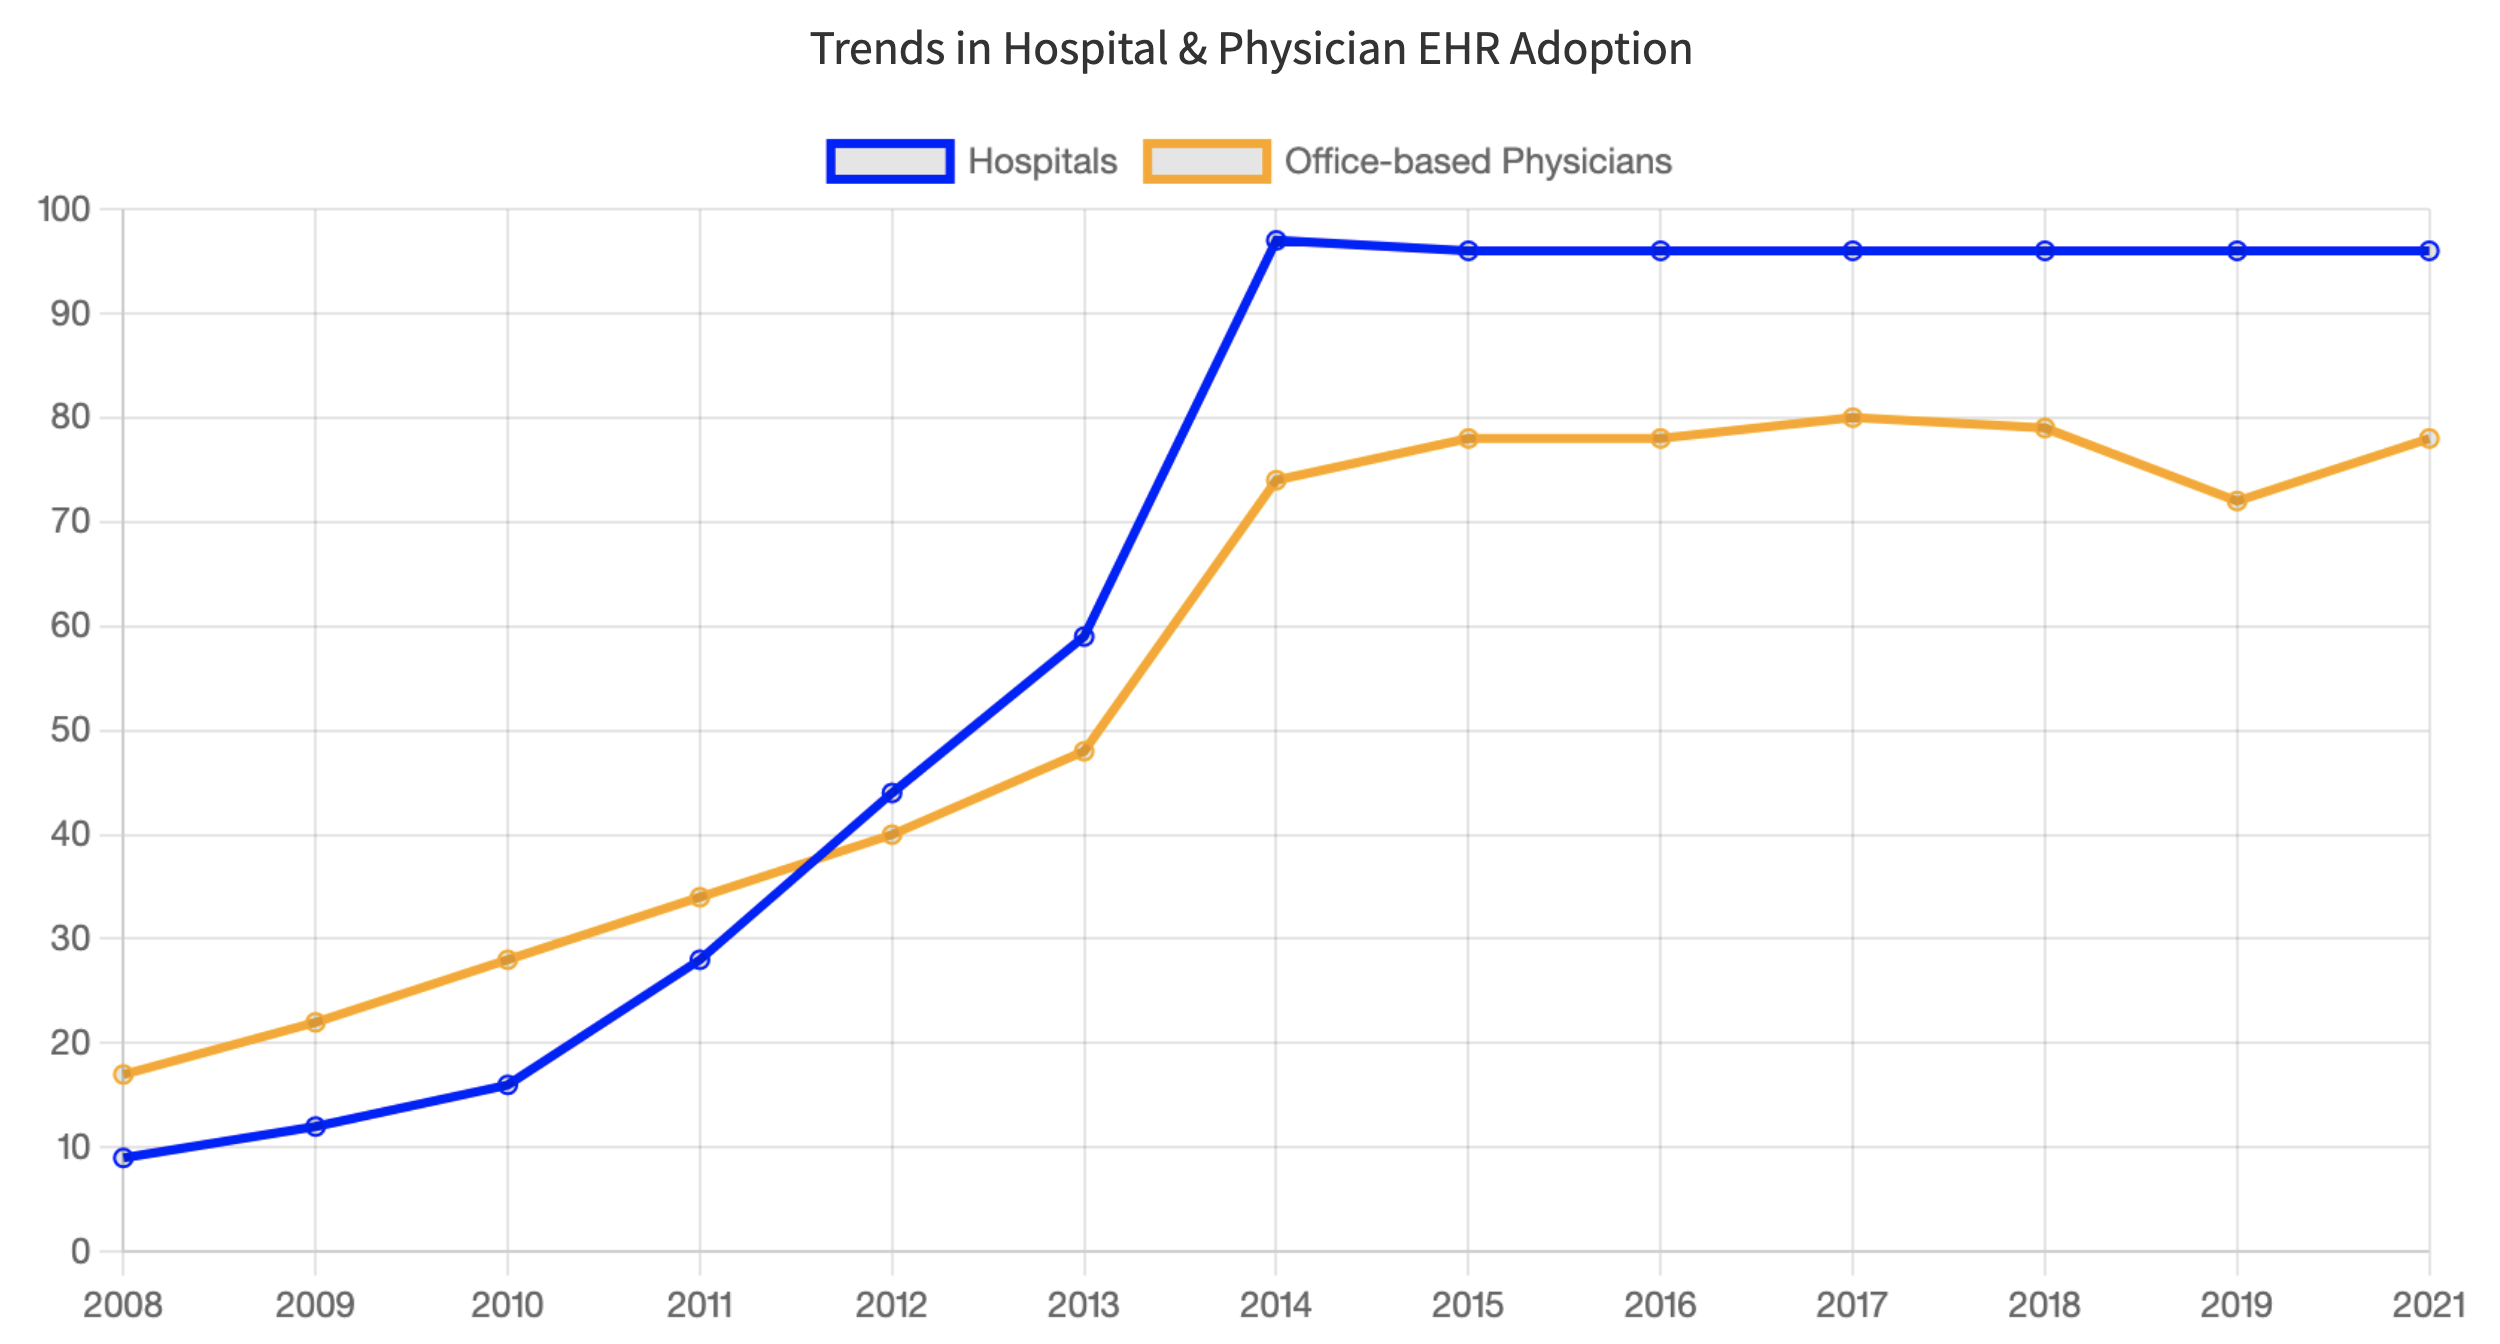 Graph showing trend in hospital and physician EHR adoption form 2008 to 2021. Adoption is between 10 and 20% in 2008, rising to >70% in 2014.